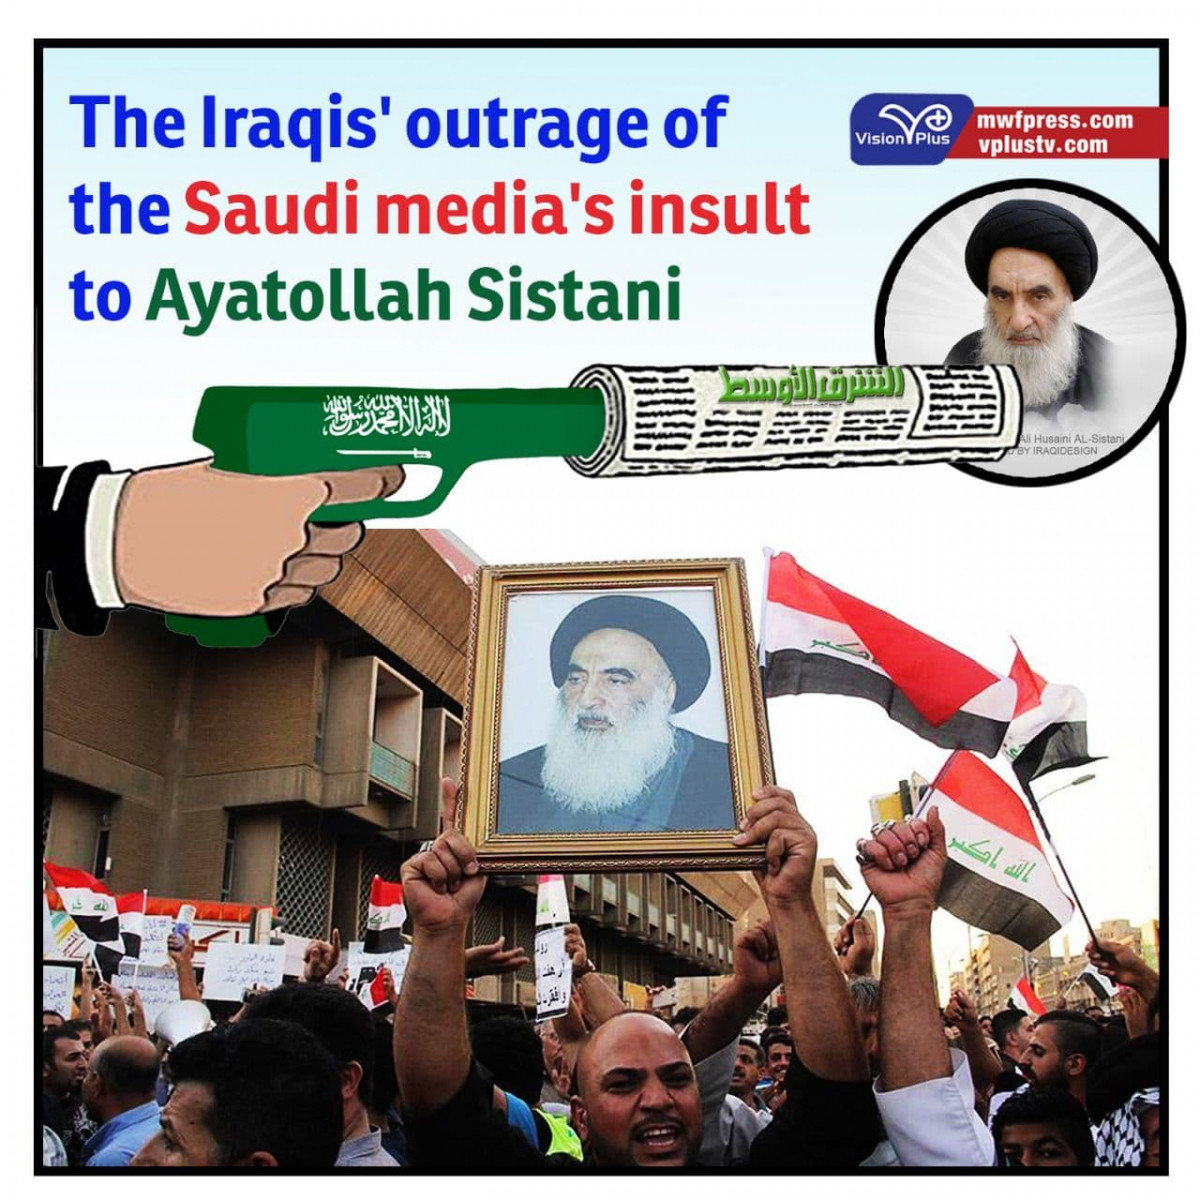 The Iraqis' outrage of the Saudi media's insult to Ayatollah Sistani